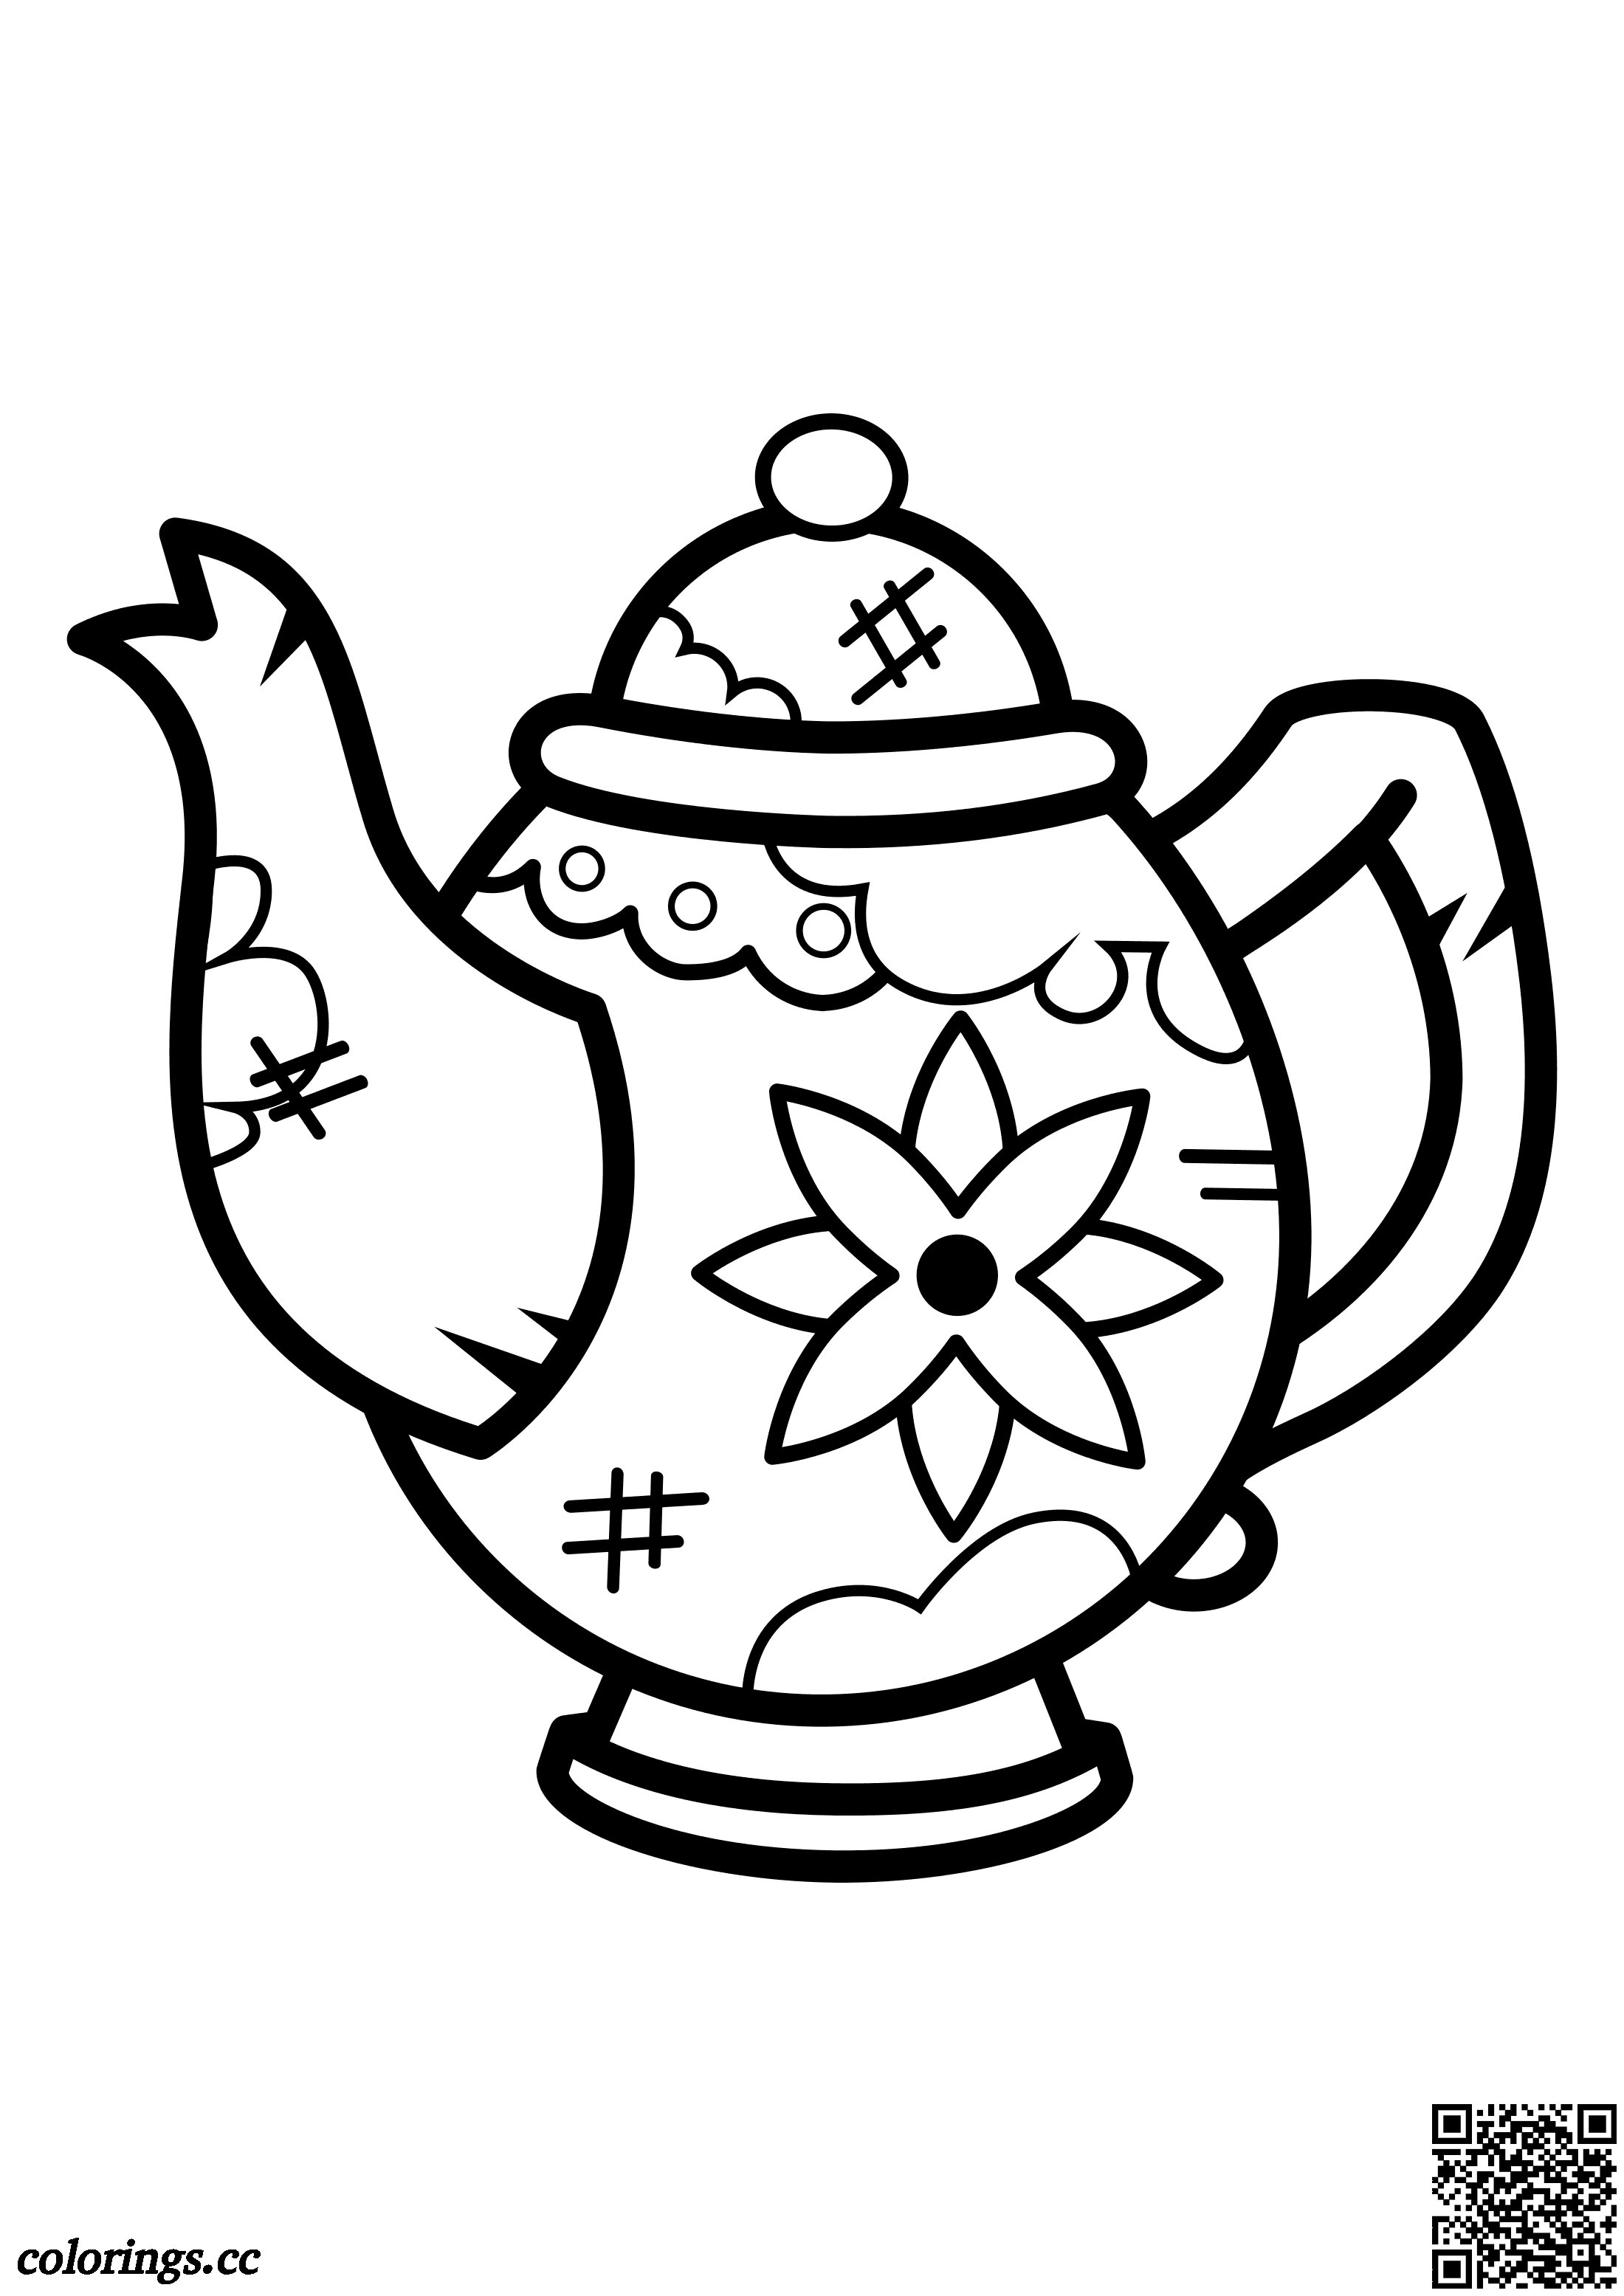 Momma Teapot coloring pages, Crocodile Swampy coloring pages - Colorings.cc